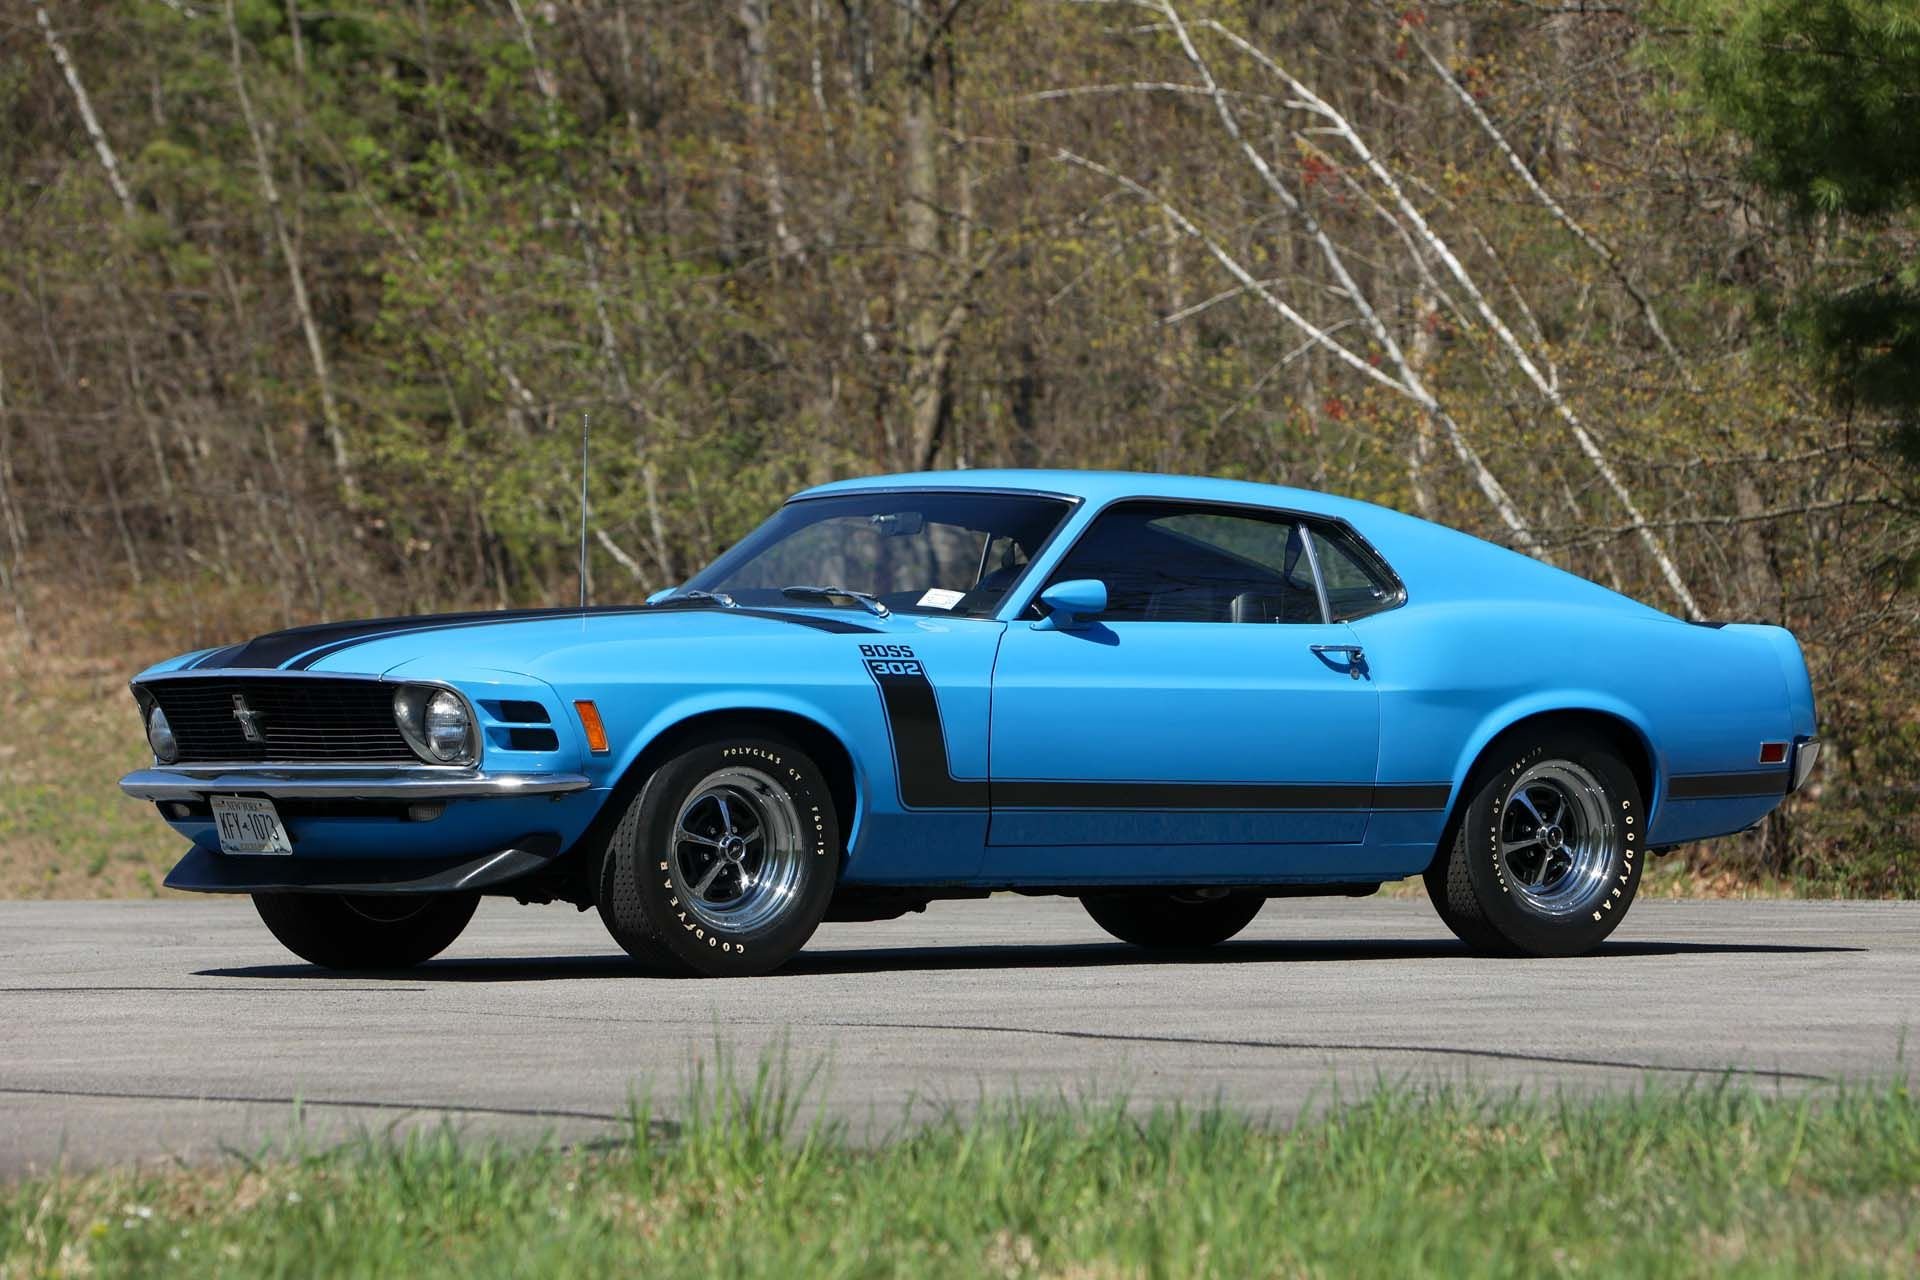 1970 Ford Mustang Boss | the Drive: The Cars of Jim Taylor | Collector Car Auctions Broad Arrow Auctions